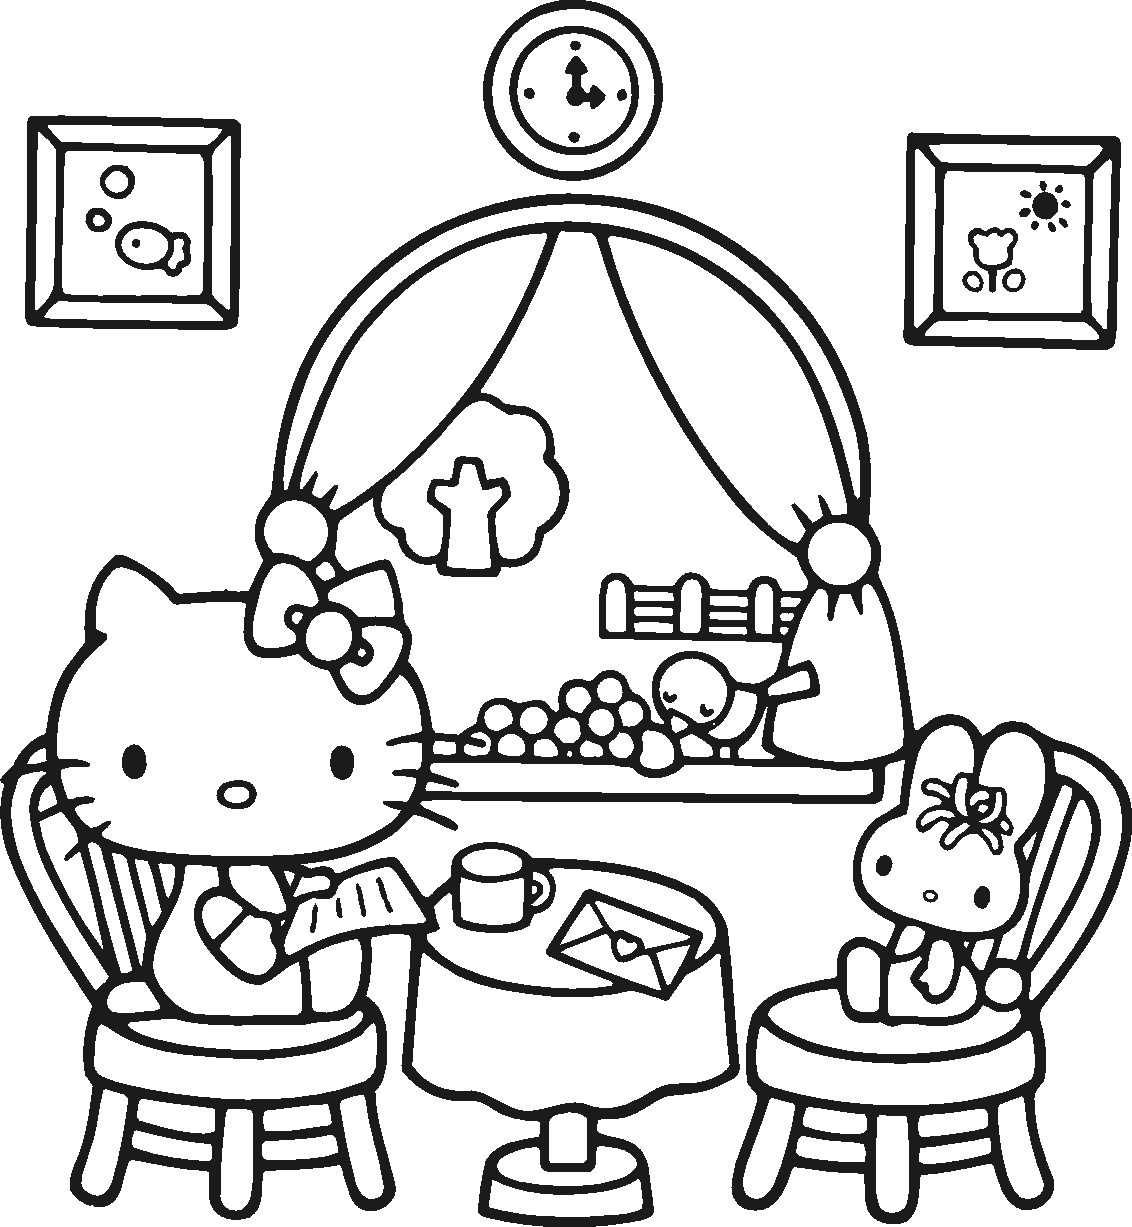 coloring page hello kitty hello kitty coloring pages page coloring kitty hello 